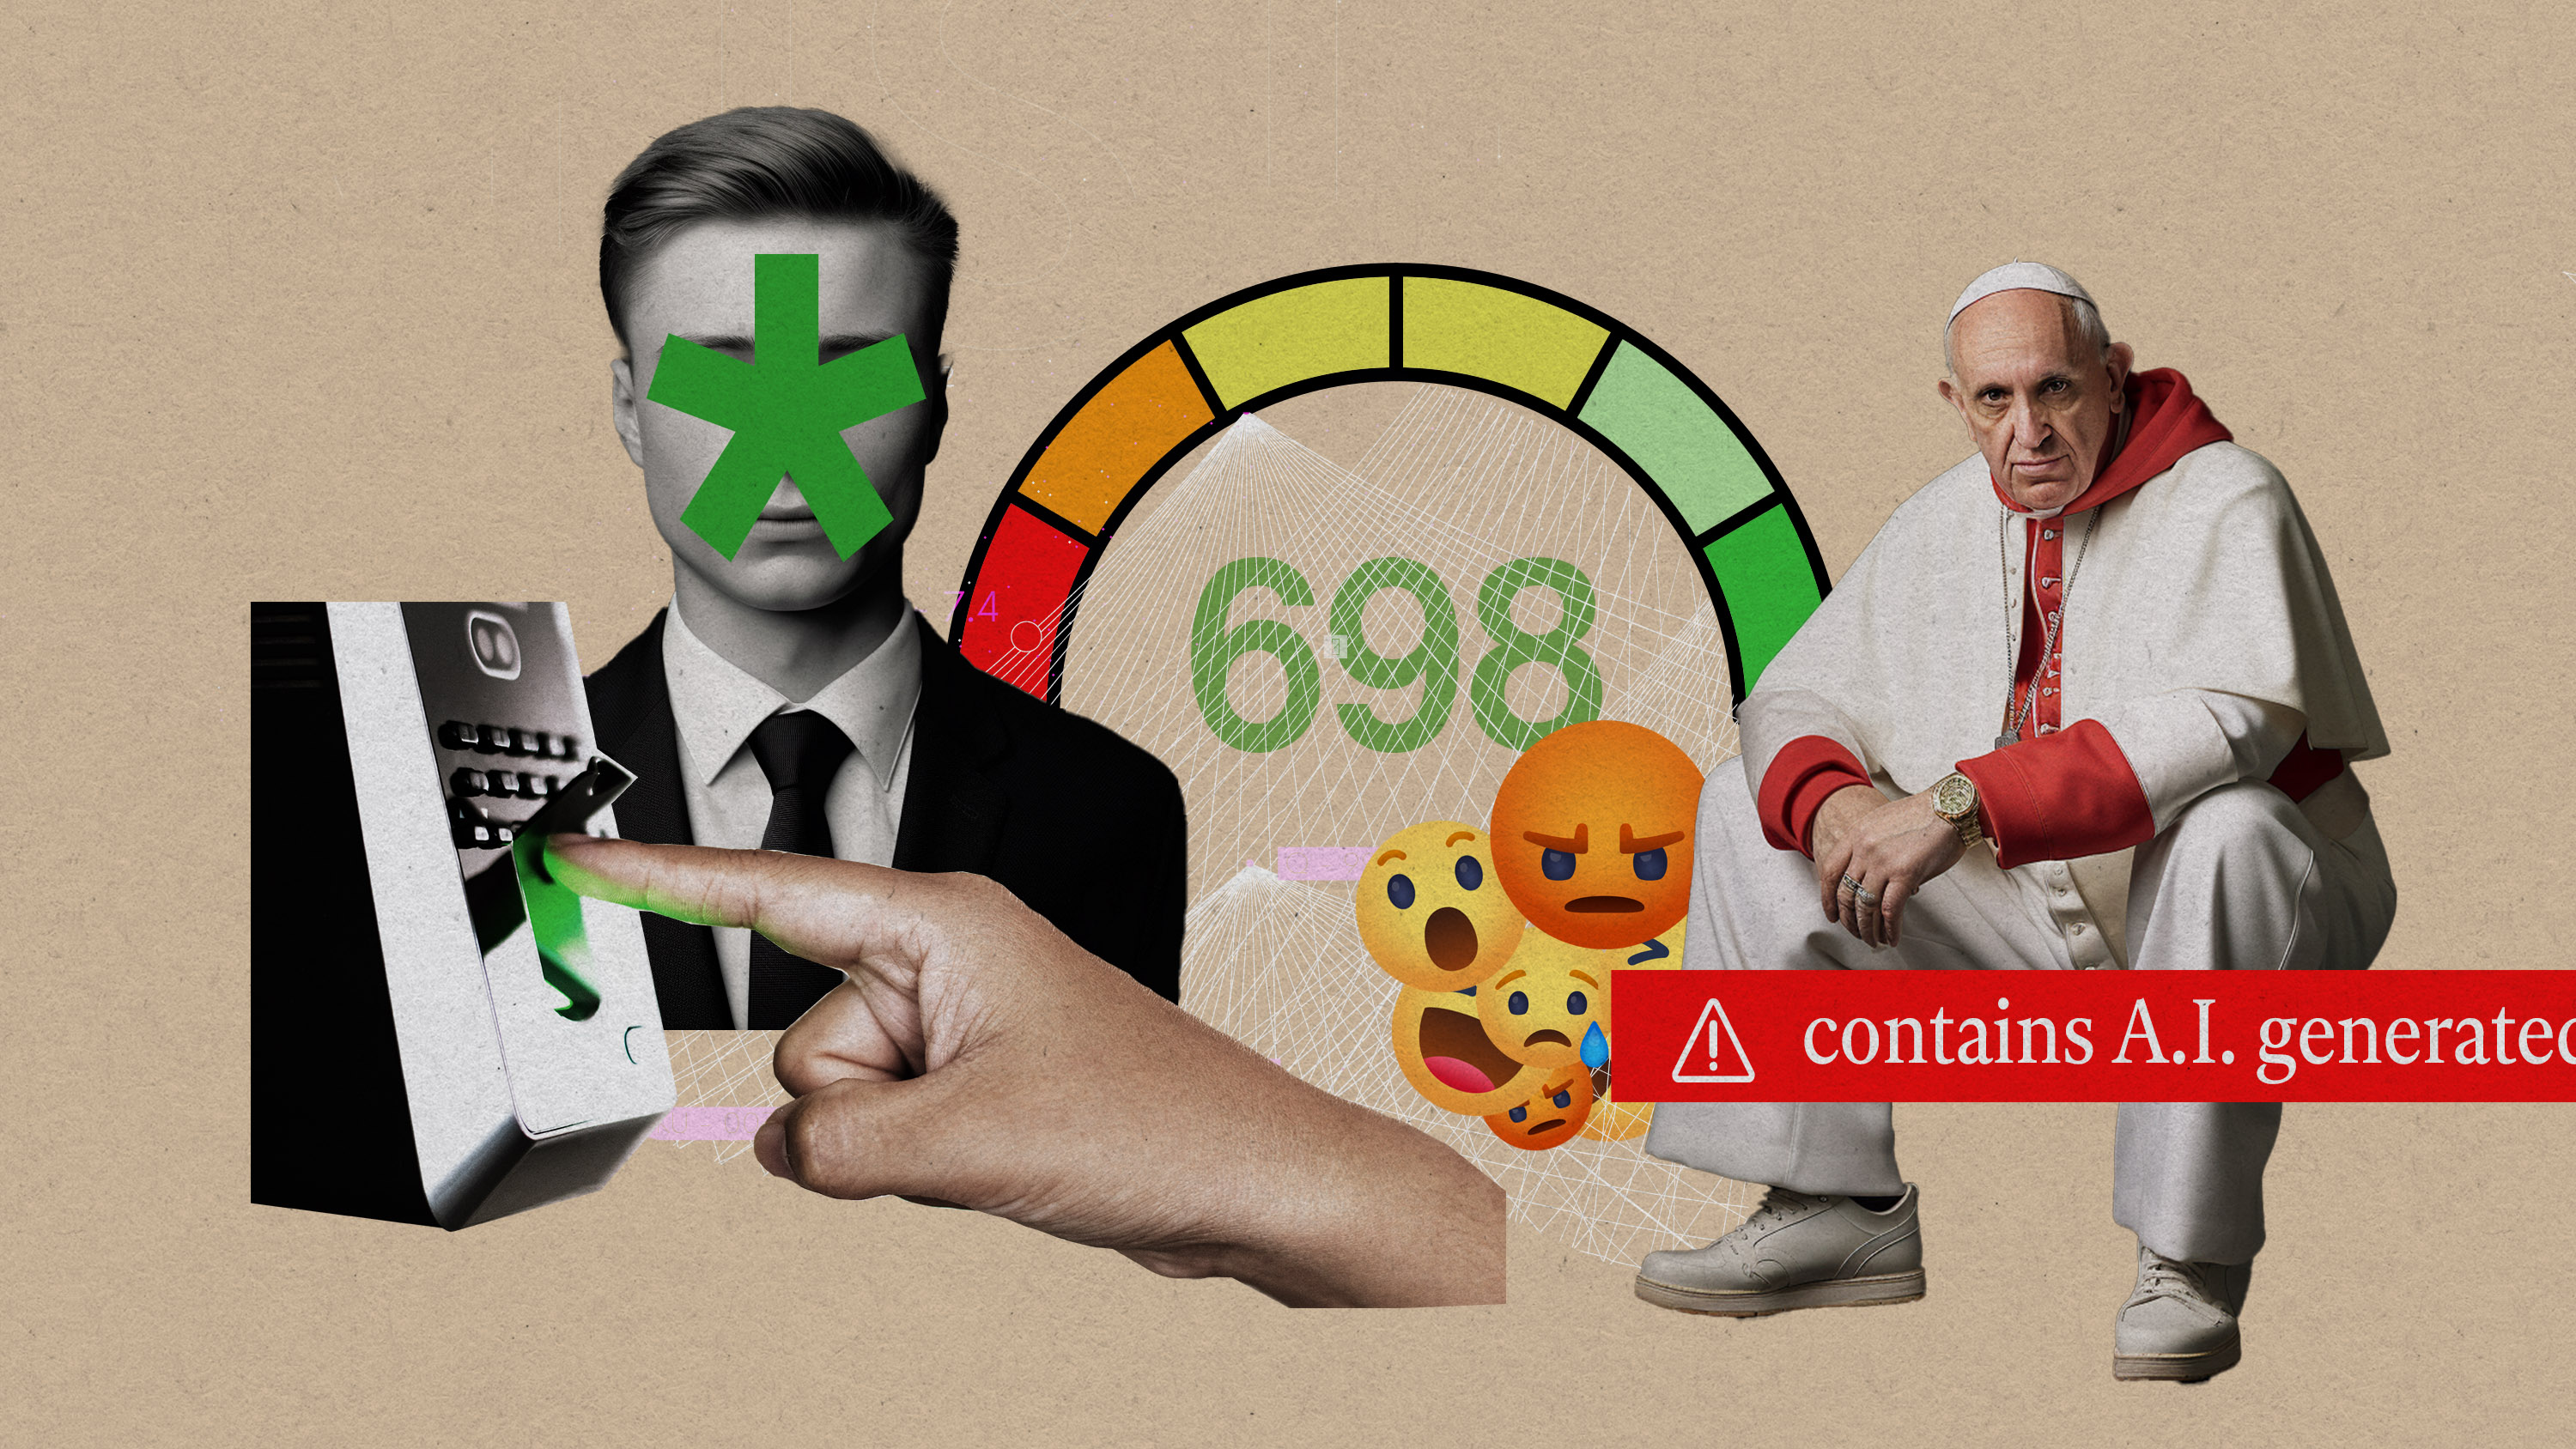 collage of AI related items including biometric scan, face recognition, social score, content moderation, and AI generated image resembling the pope with a disclaimer